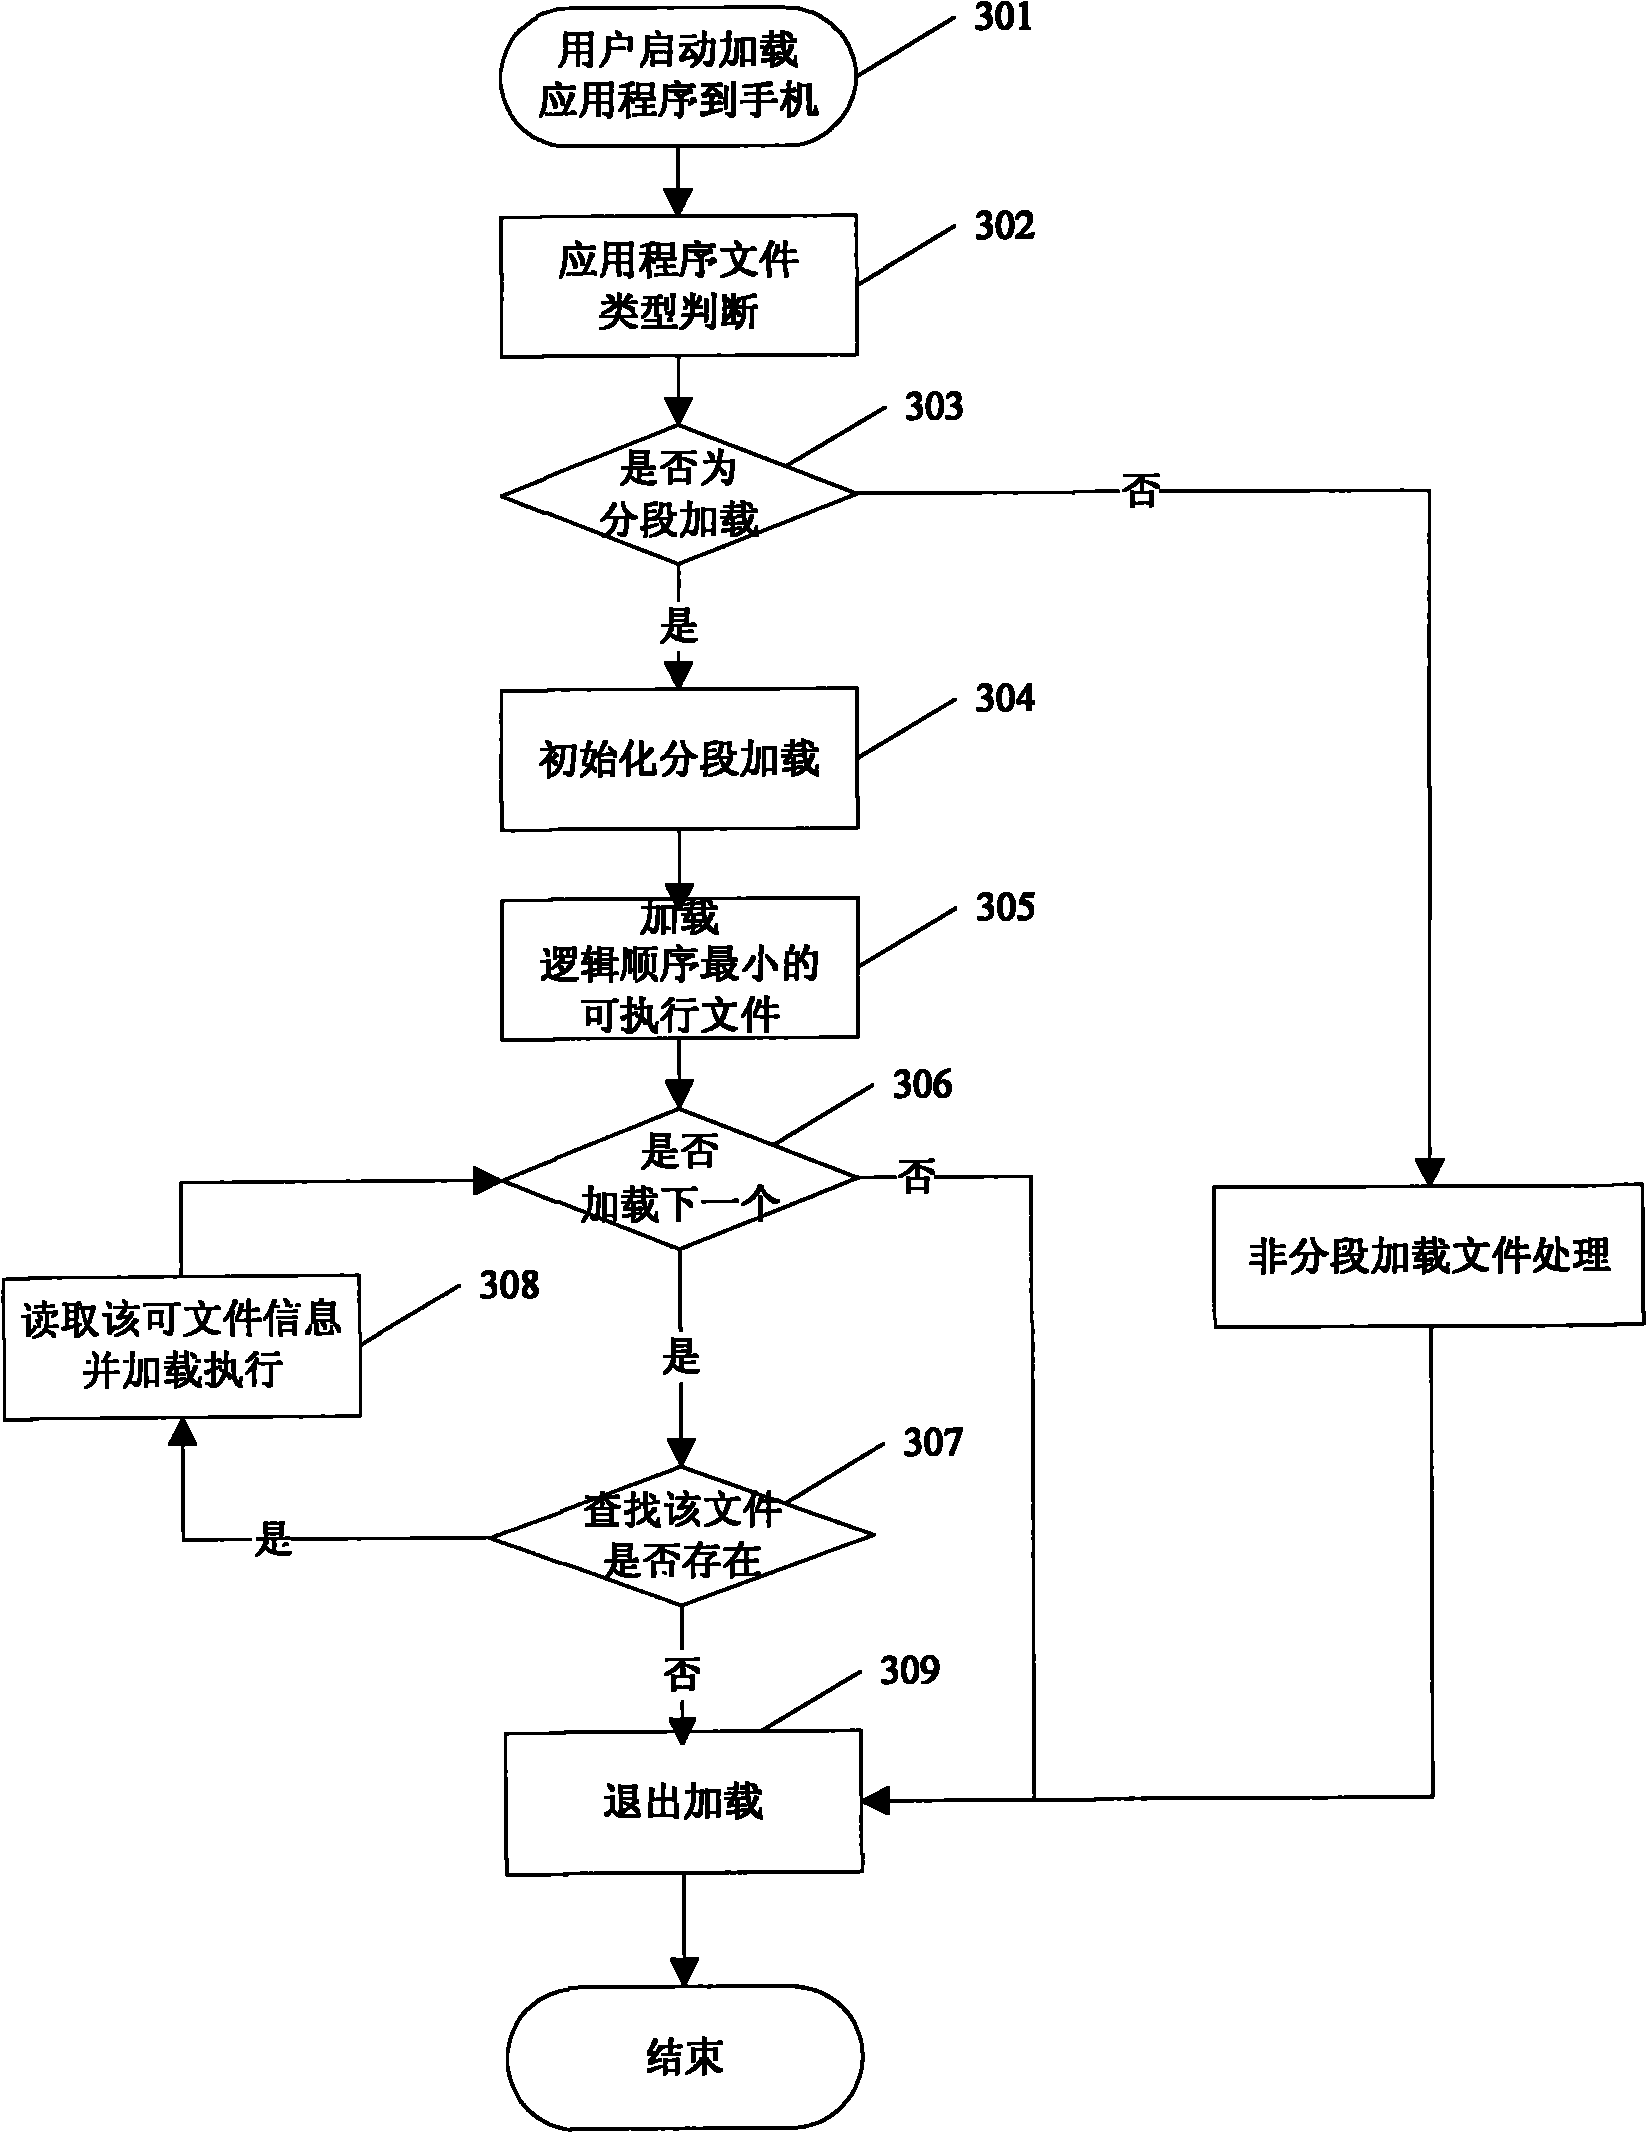 Method and device for sectionally loading application programs by mobile terminal